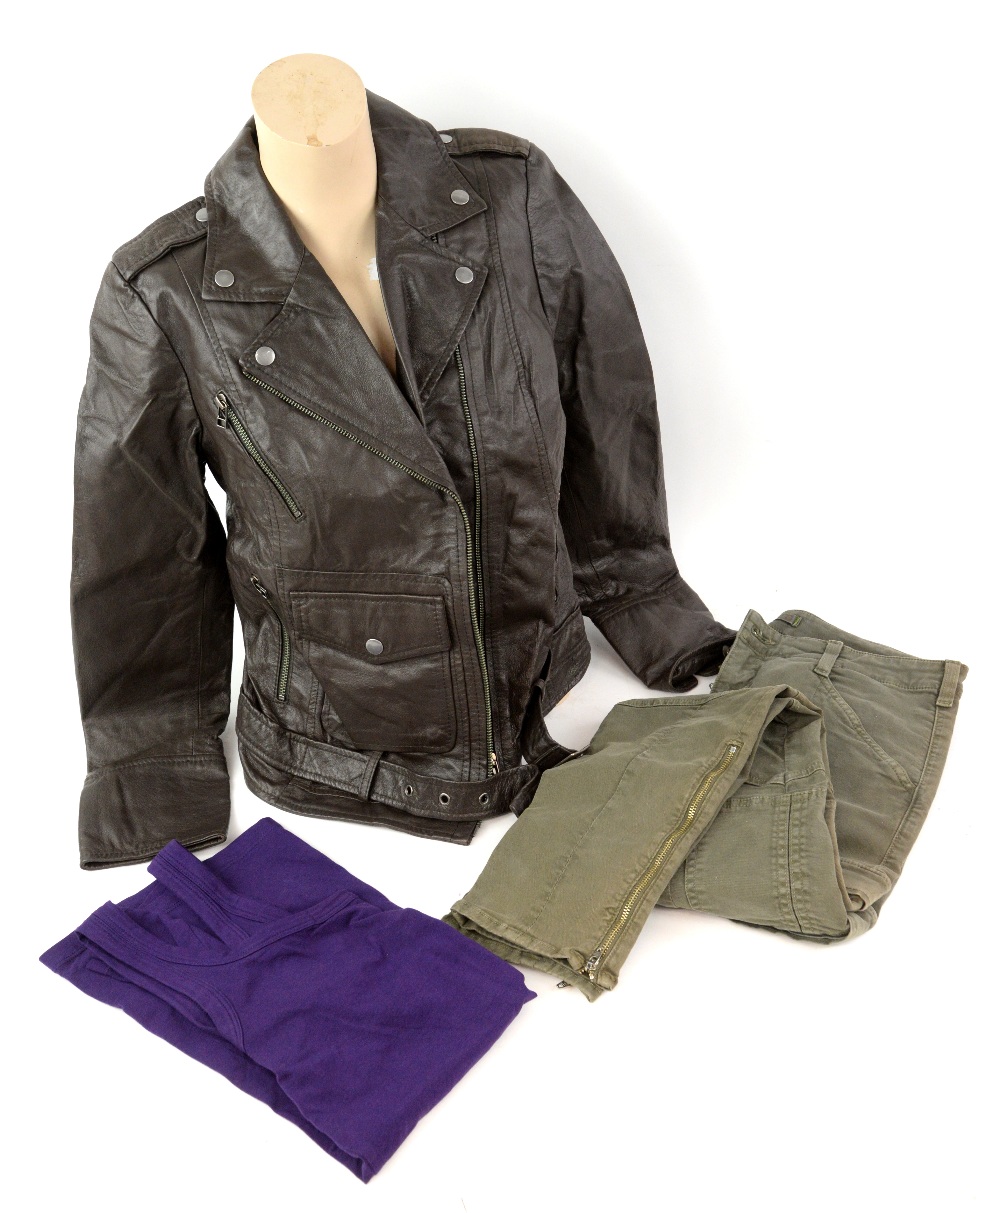 Torchwood: Miracle Day' (2011) - Gwen Cooper costume consisting of a brown leather jacket, - Image 2 of 4